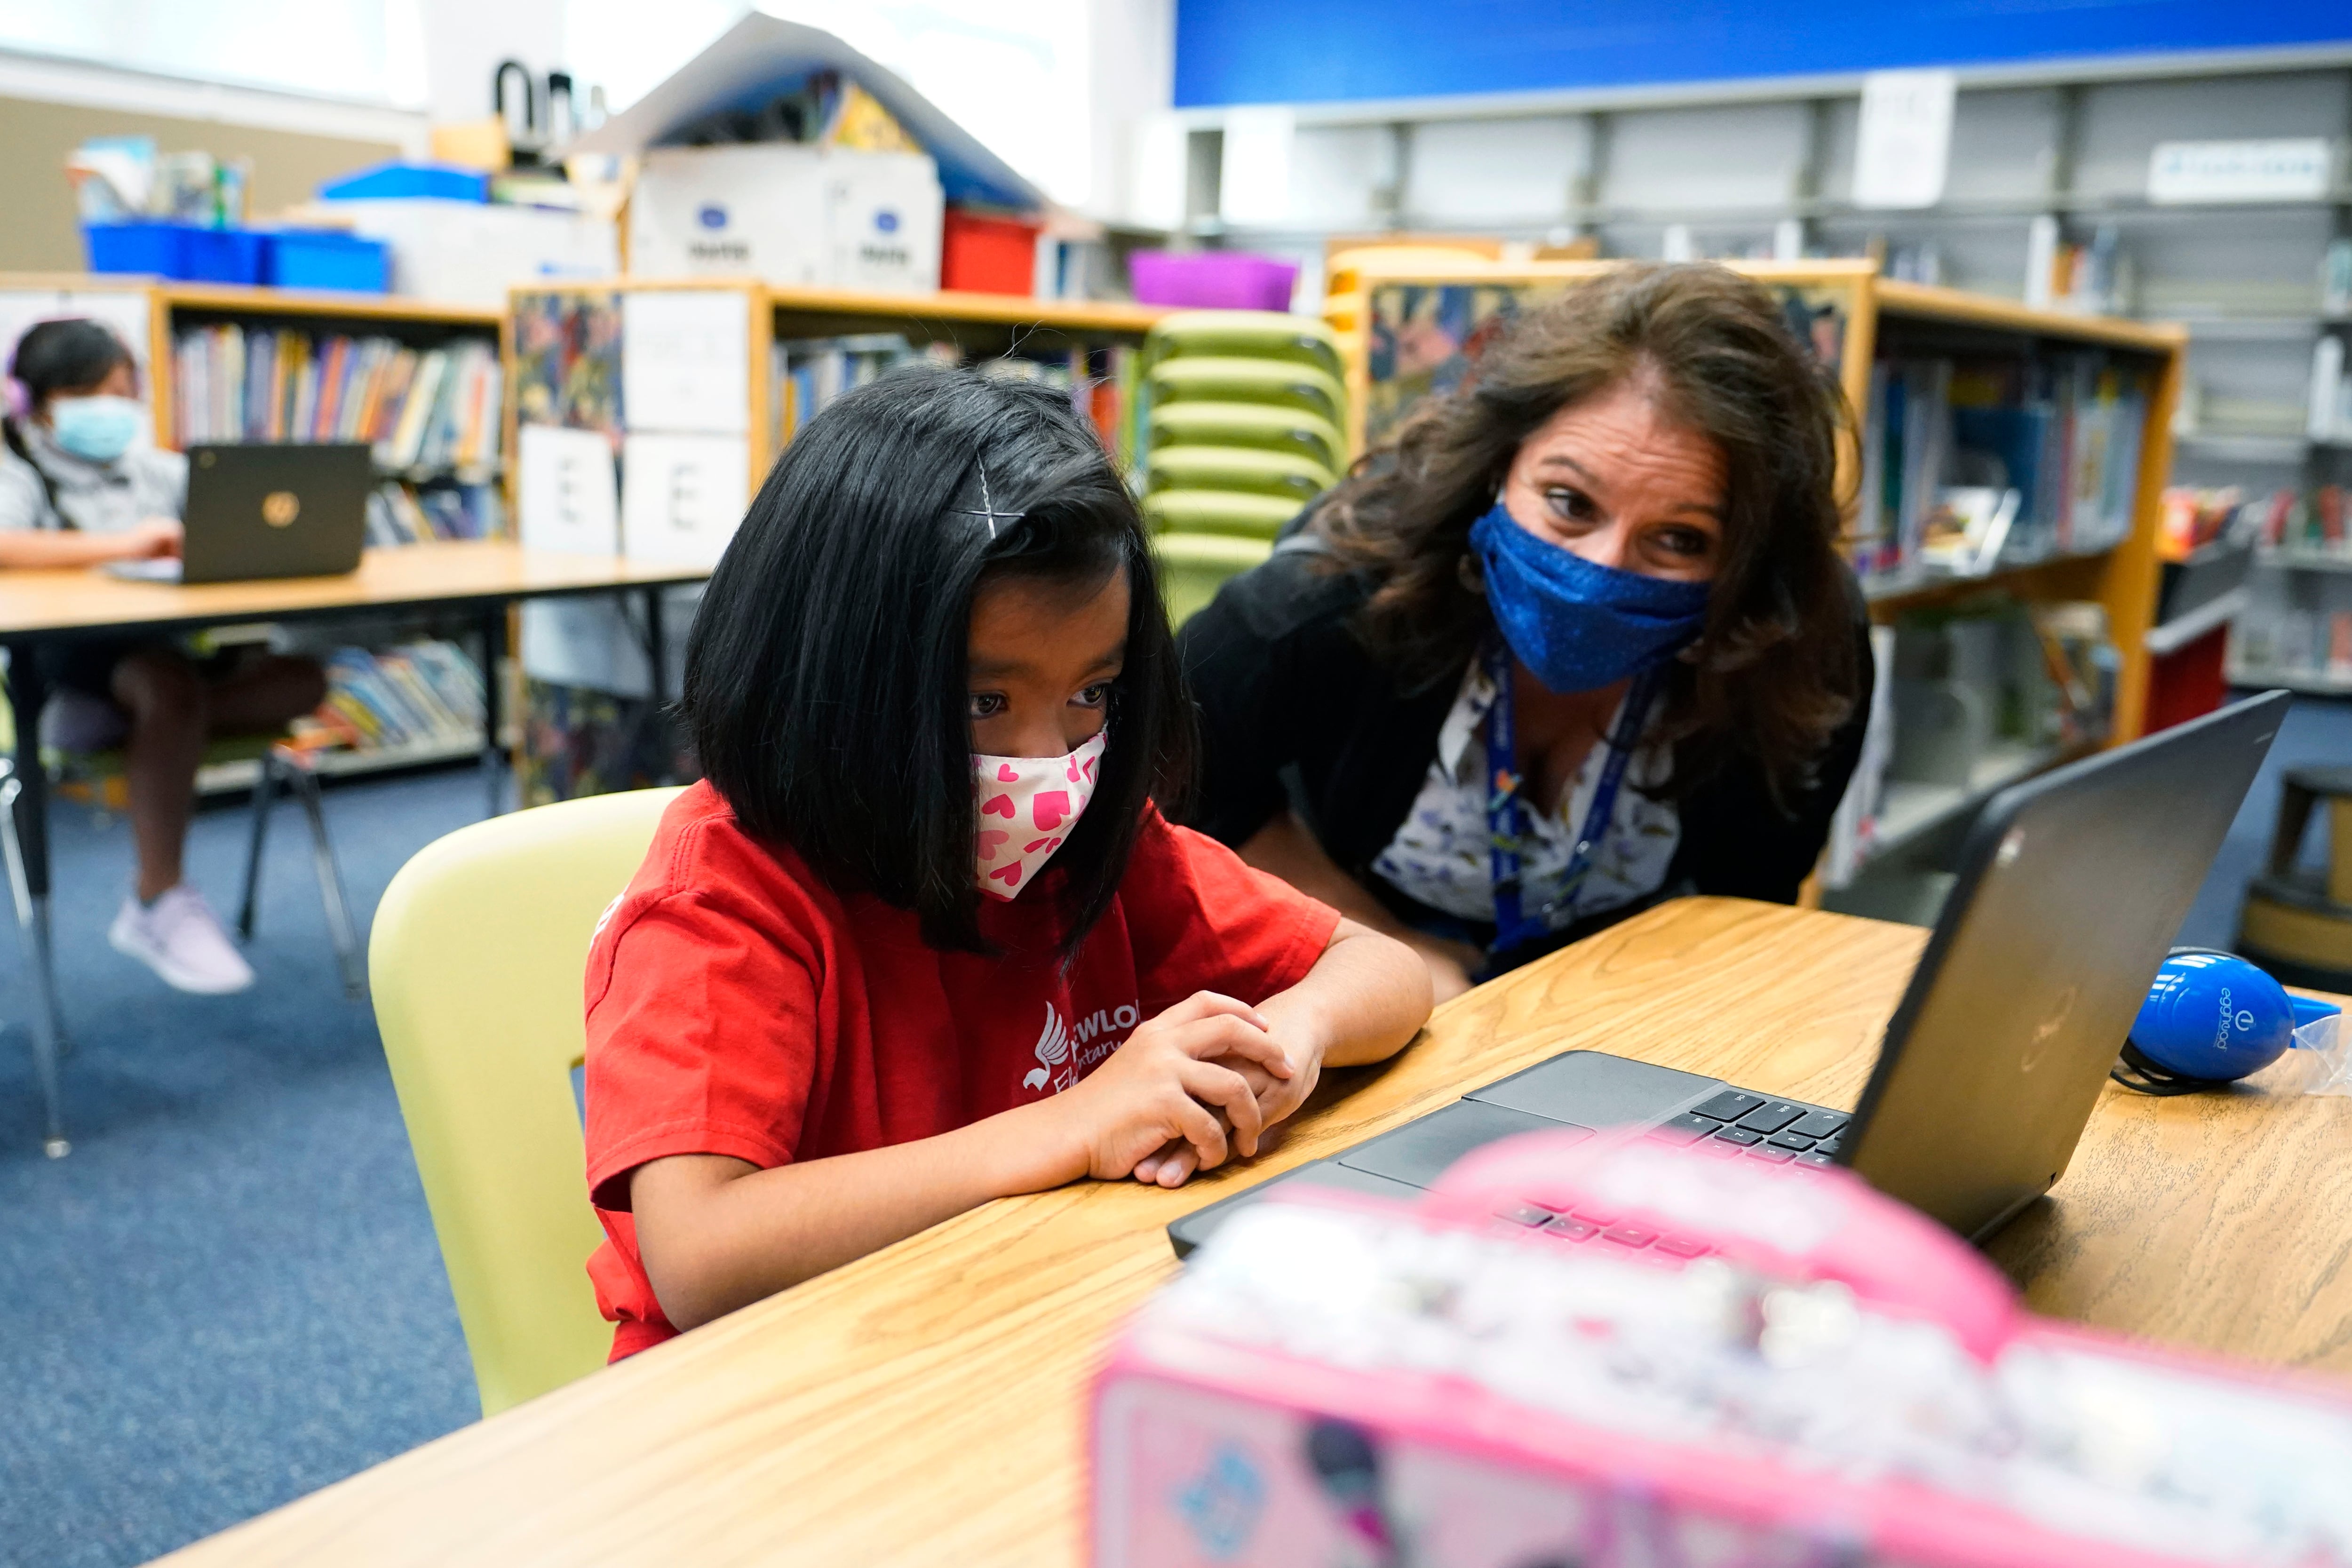 Denver Superintendent Susana Cordova talks to a masked girl working on a laptop at a learning center.